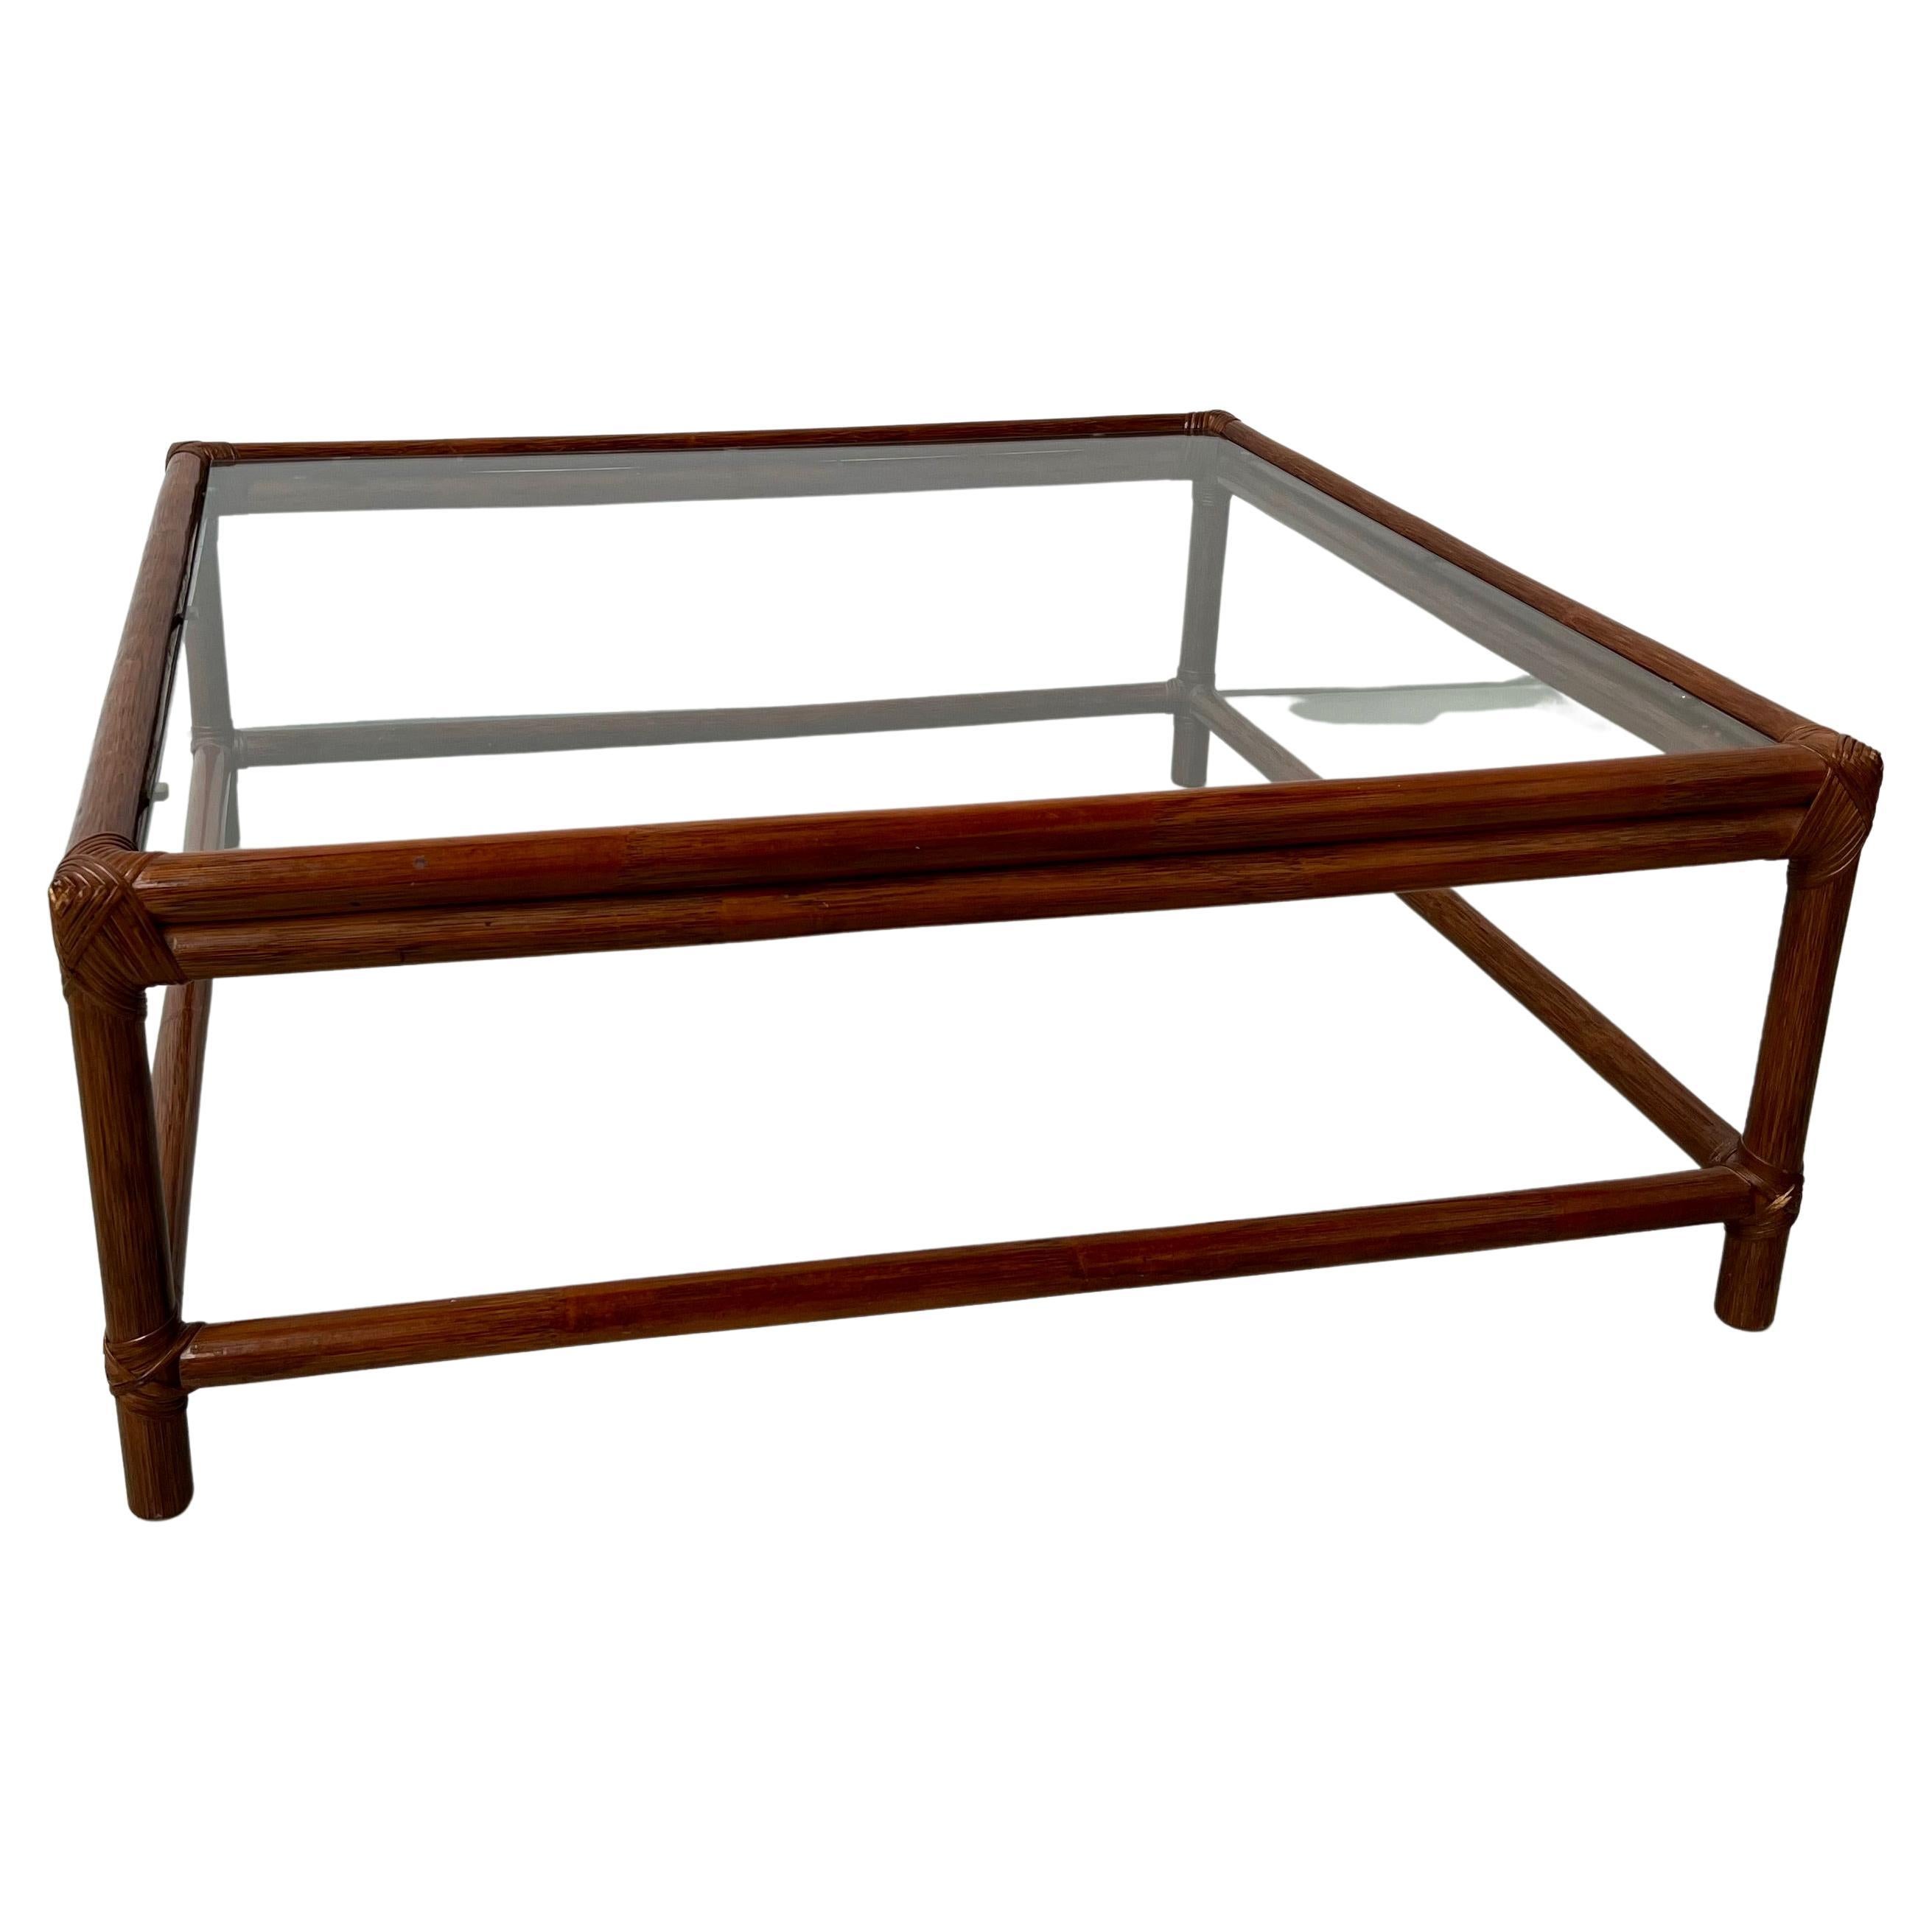 Large Artisanal French Coffee Table in Rattan and Glass, circa 1970